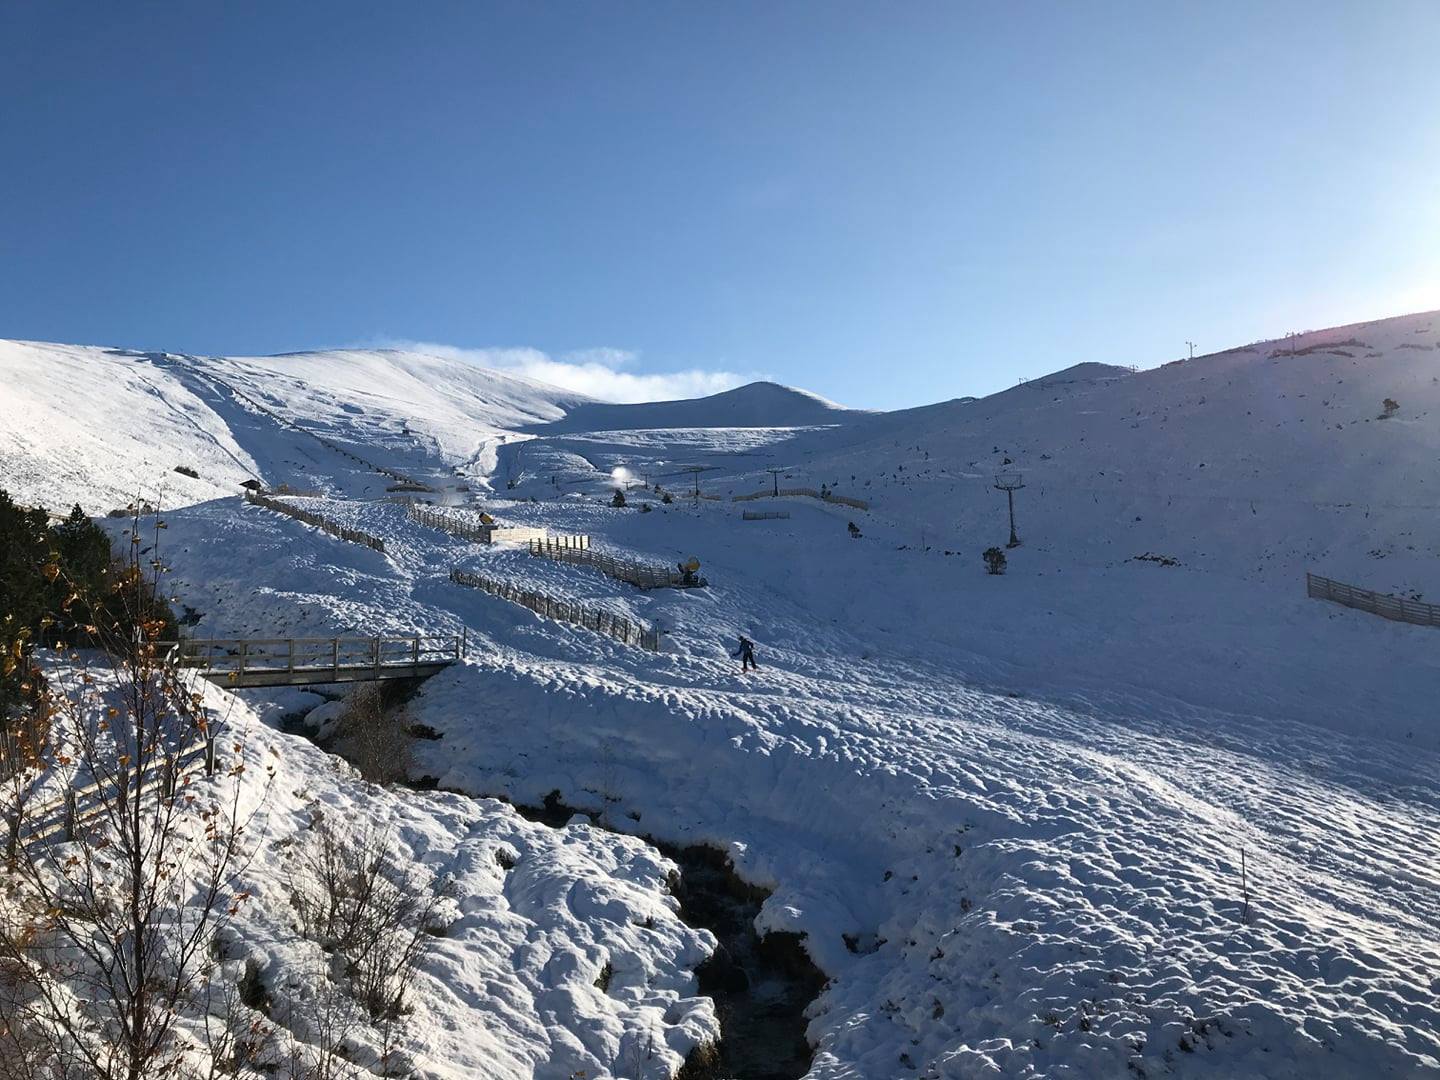 Looking great for the upcoming season, Cairngorm